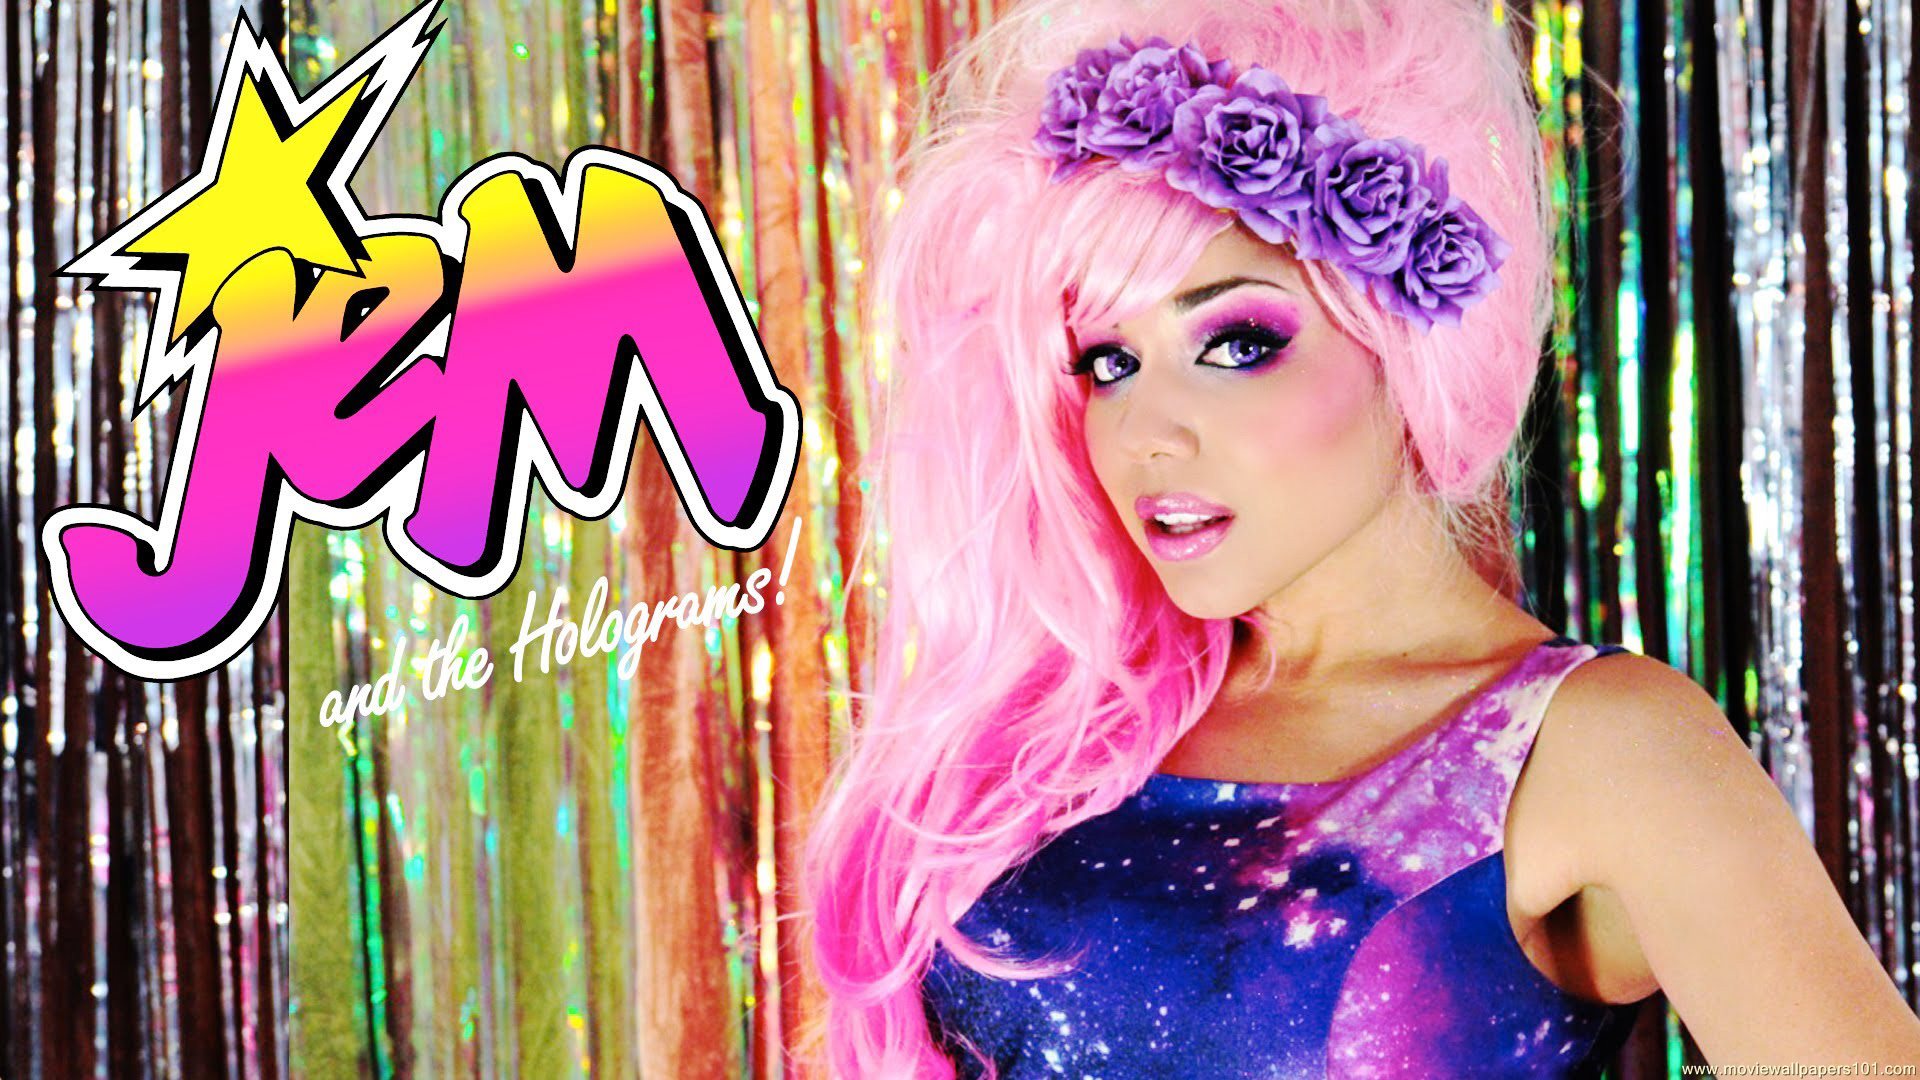 Jem and the Holograms wallpaper   1280x1024 MovieWallpapers101com